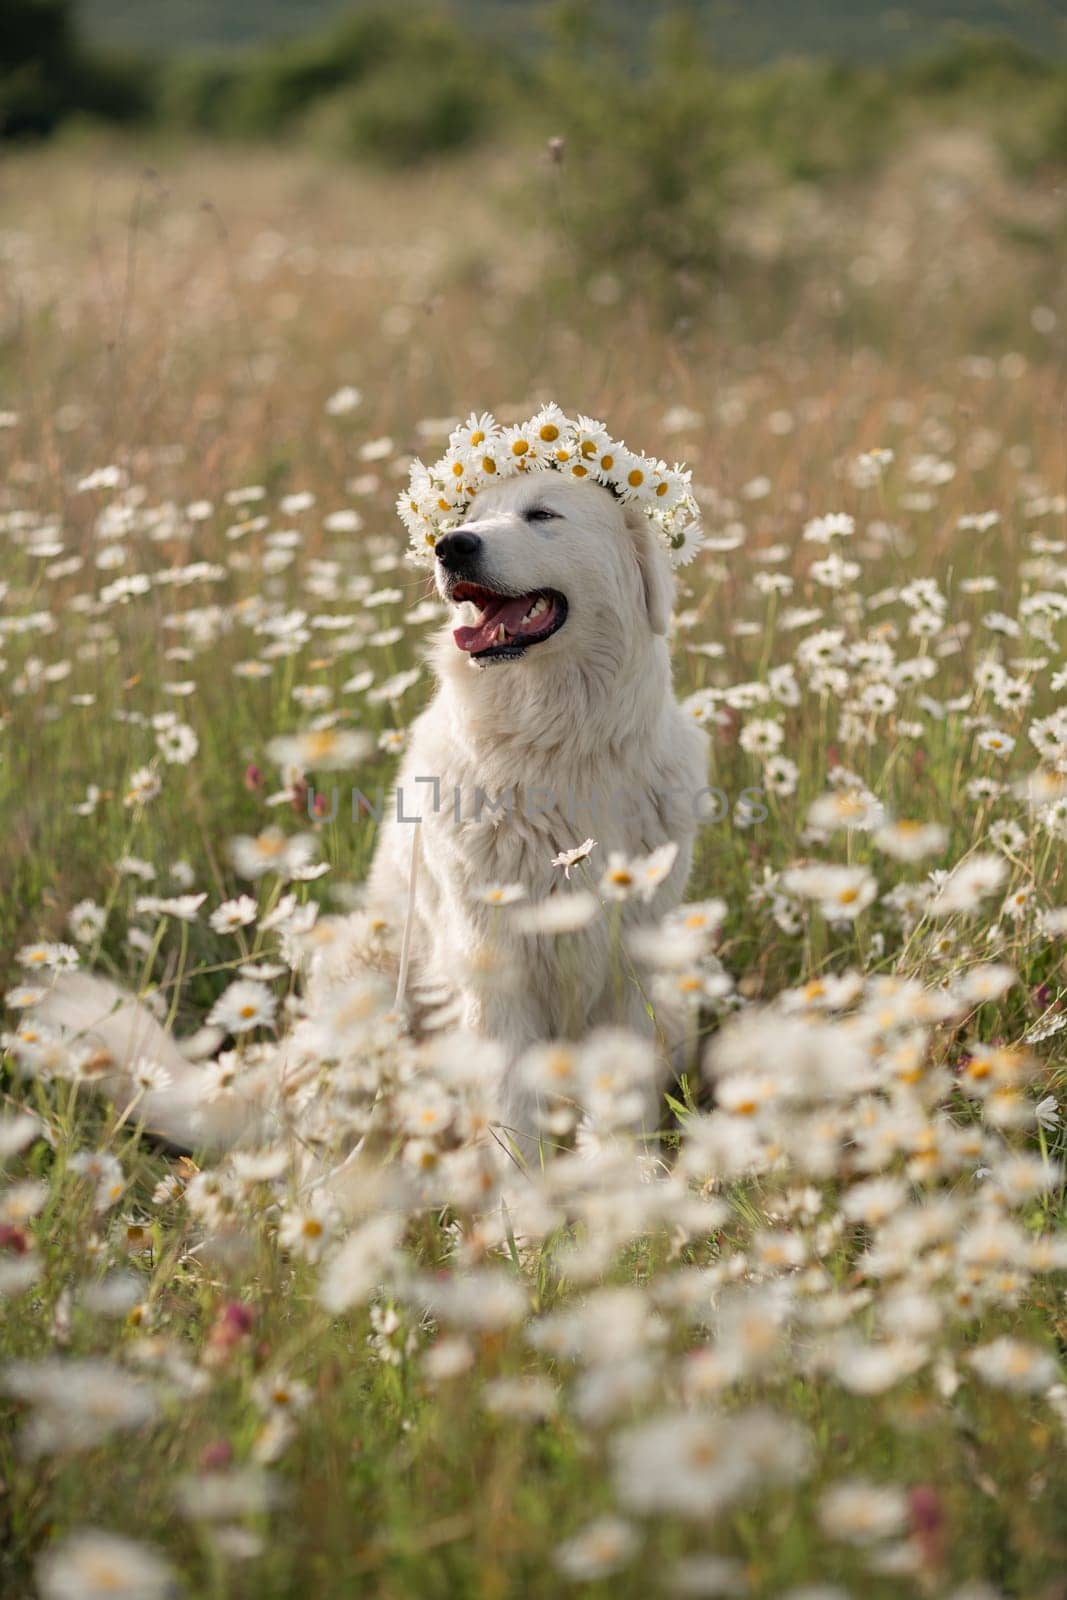 Daisies white dog Maremma Sheepdog in a wreath of daisies sits on a green lawn with wild flowers daisies, walks a pet. Cute photo with a dog in a wreath of daisies